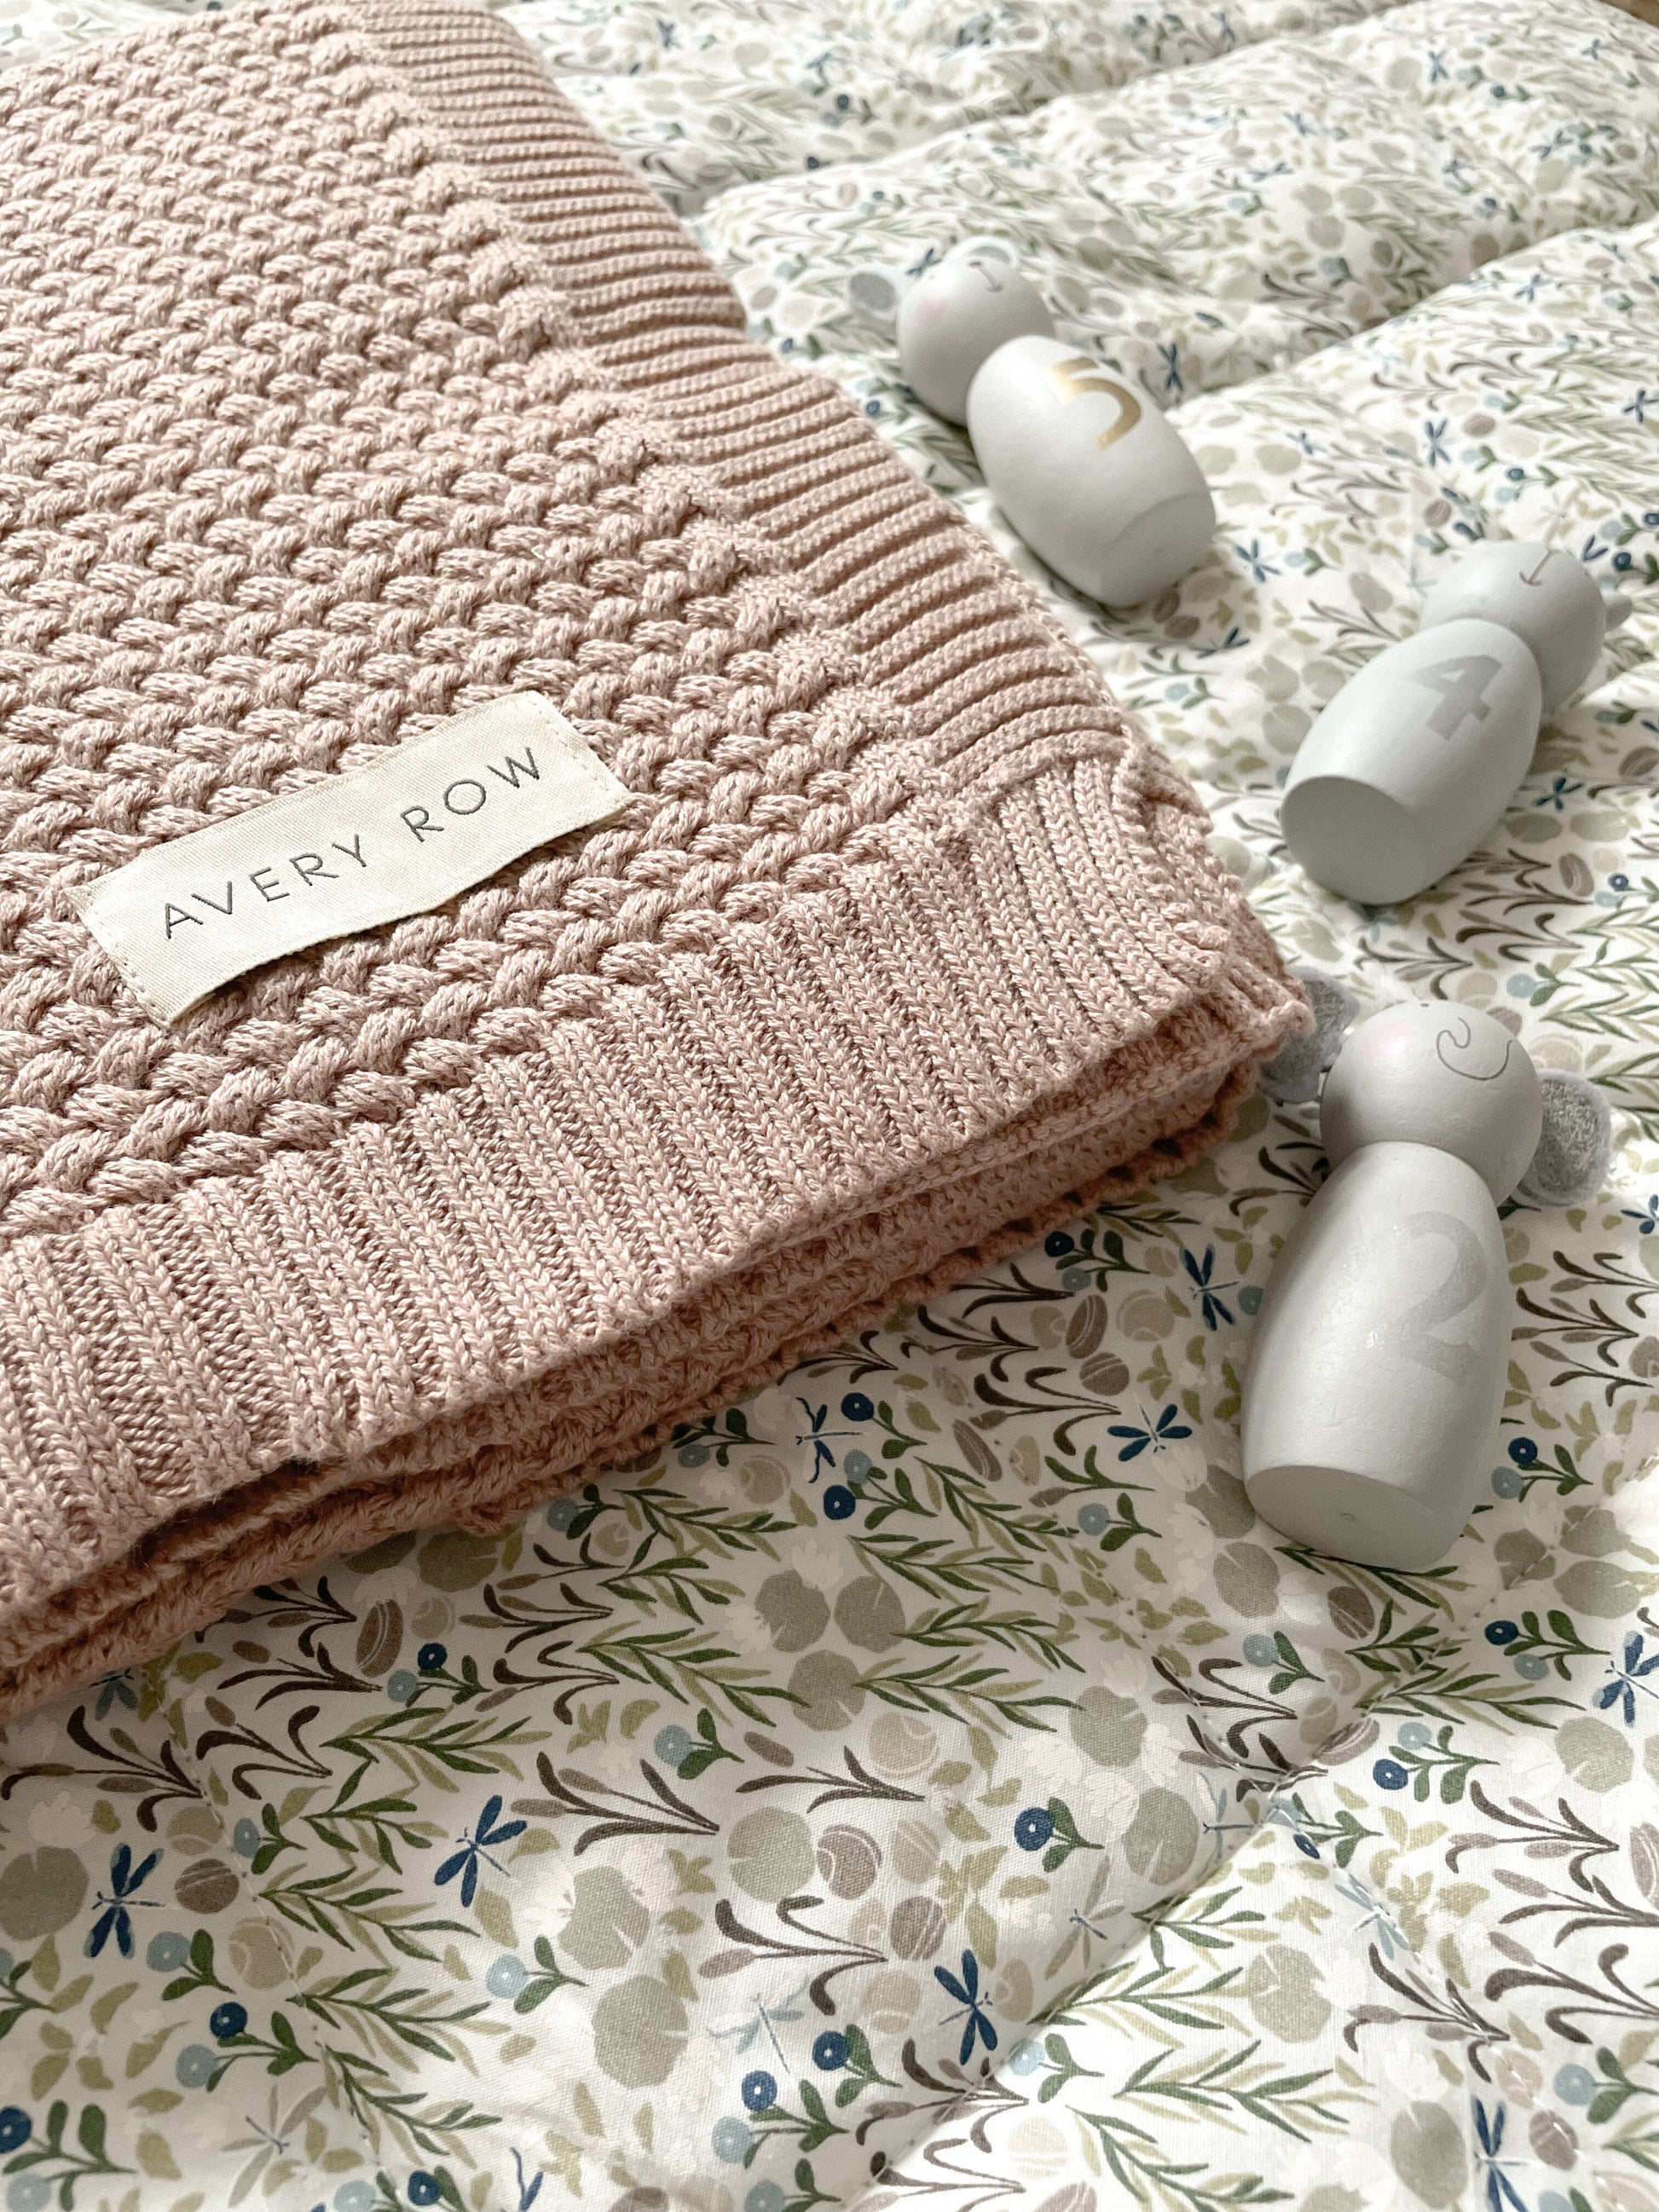 Avery Row - Plait Knit Baby Blanket - Blush Pink Baby Blanket Avery Row 